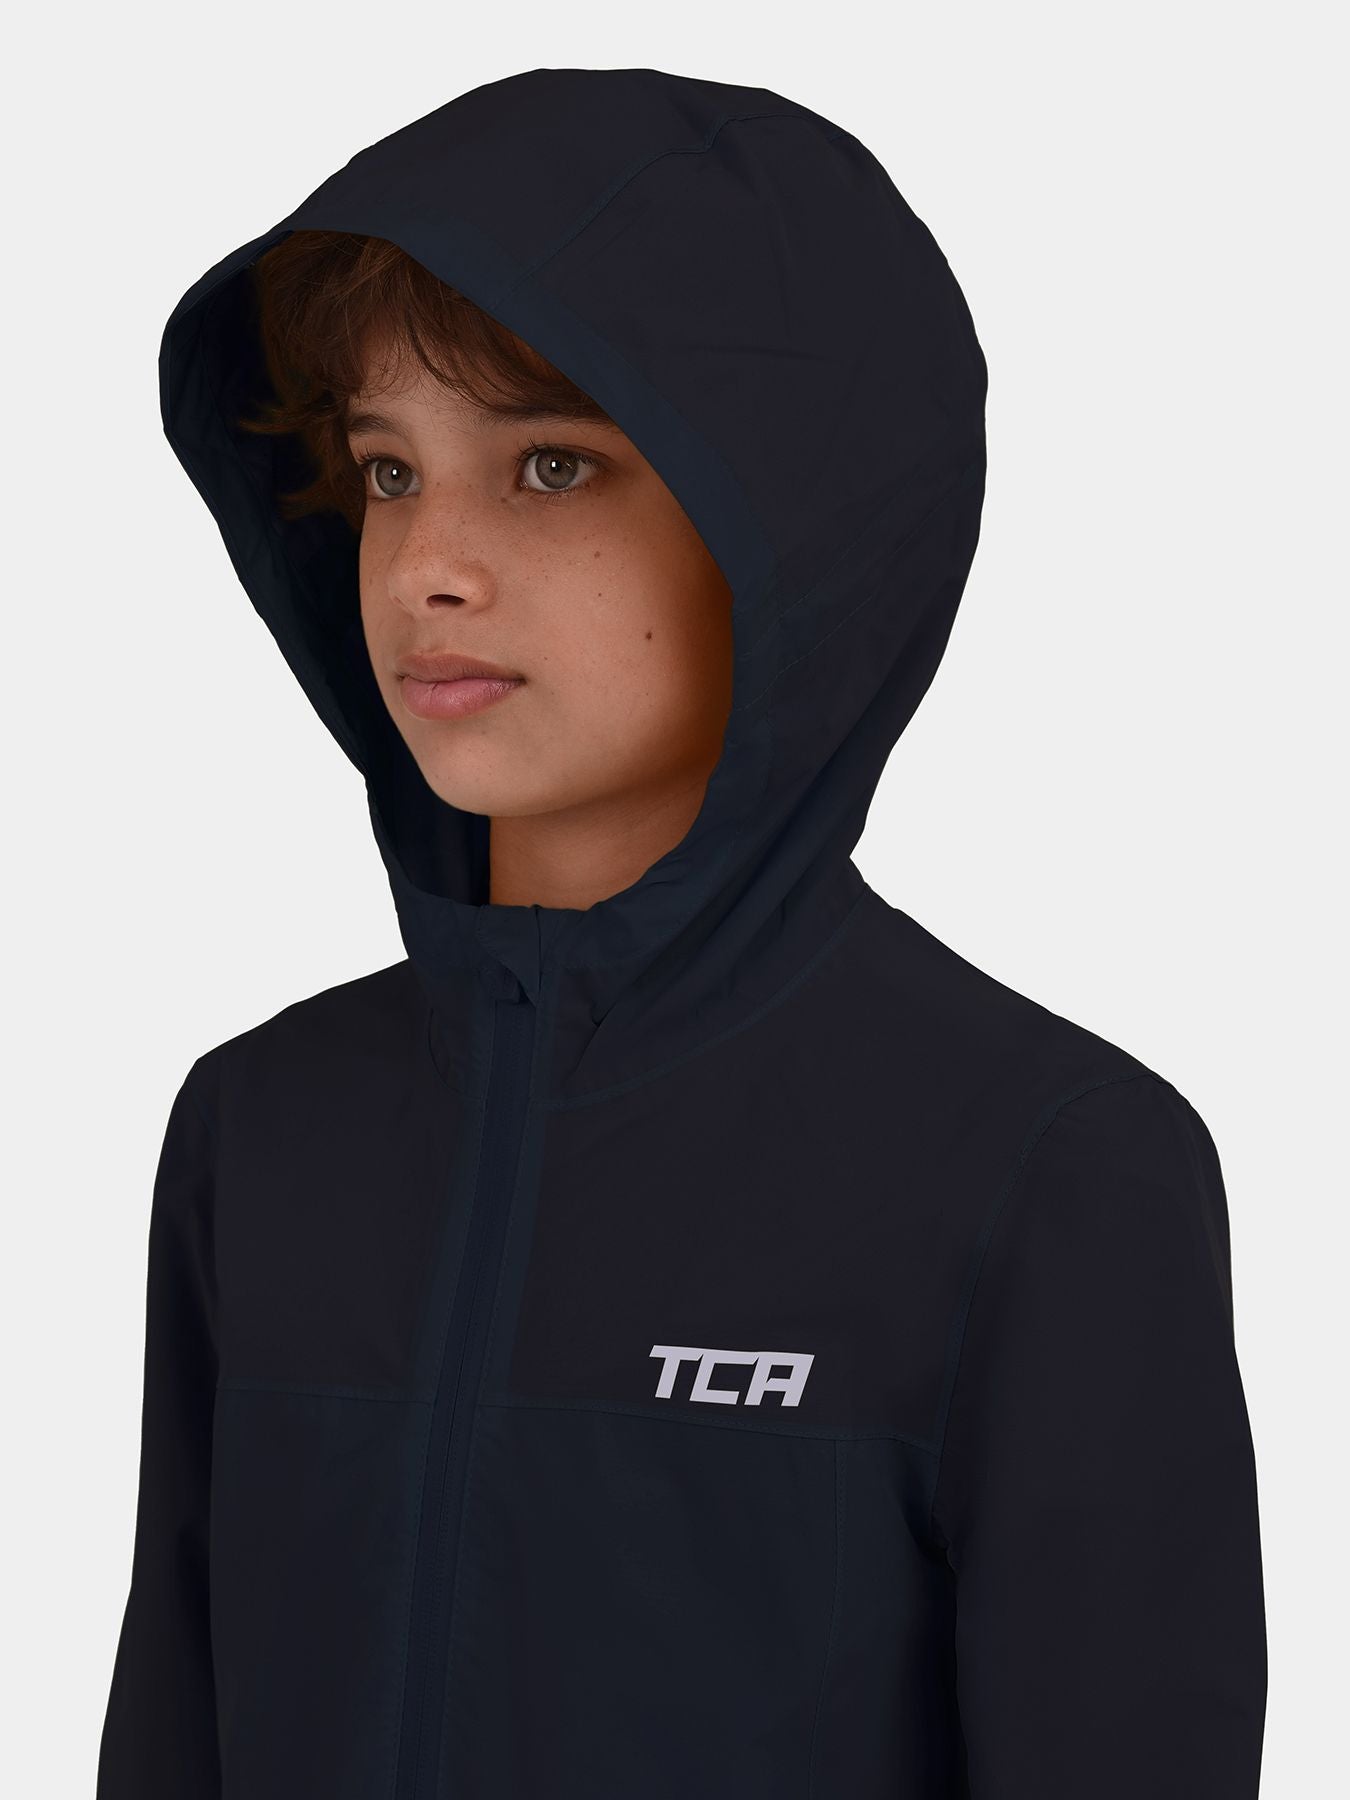 AirLite 2.0 Hooded Waterproof Rain Jacket For Boys With Side & Internal Zip Pockets & Reflective Strips